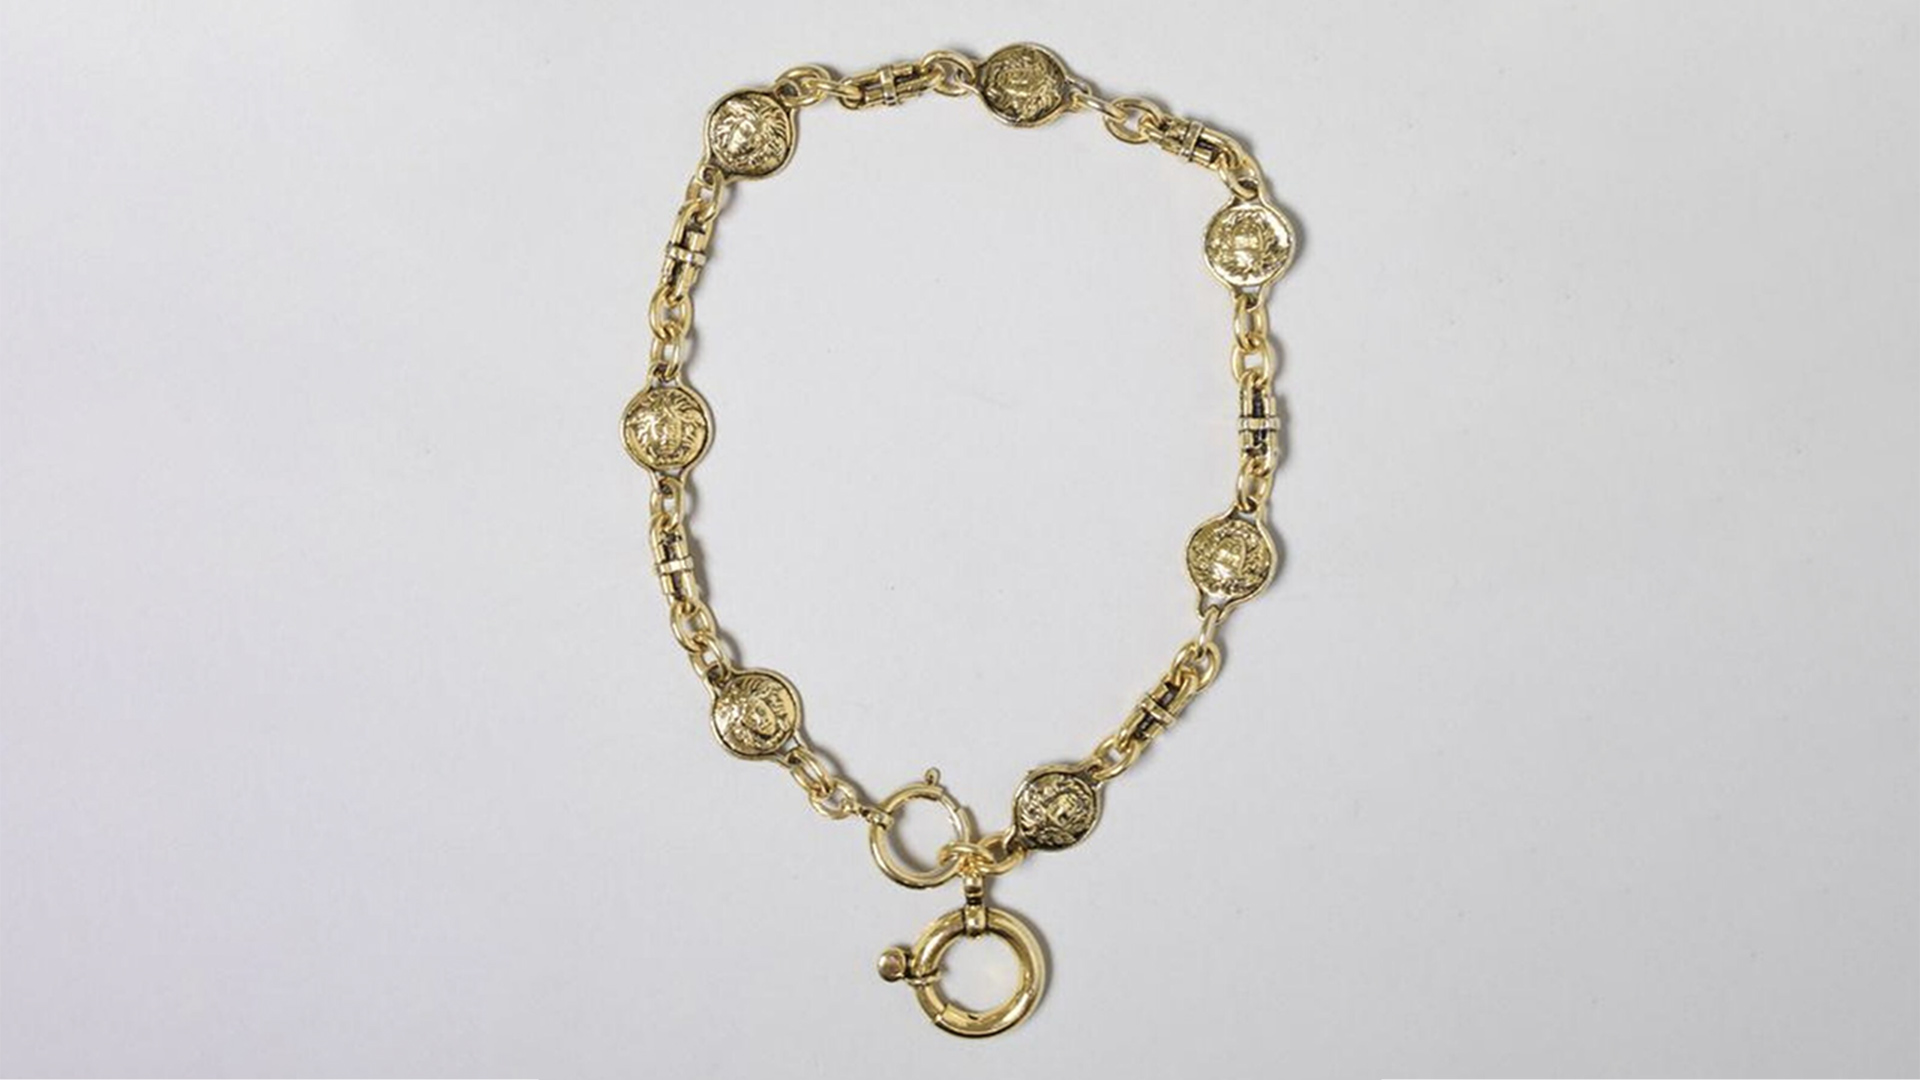 Gold necklace with Medusa heads